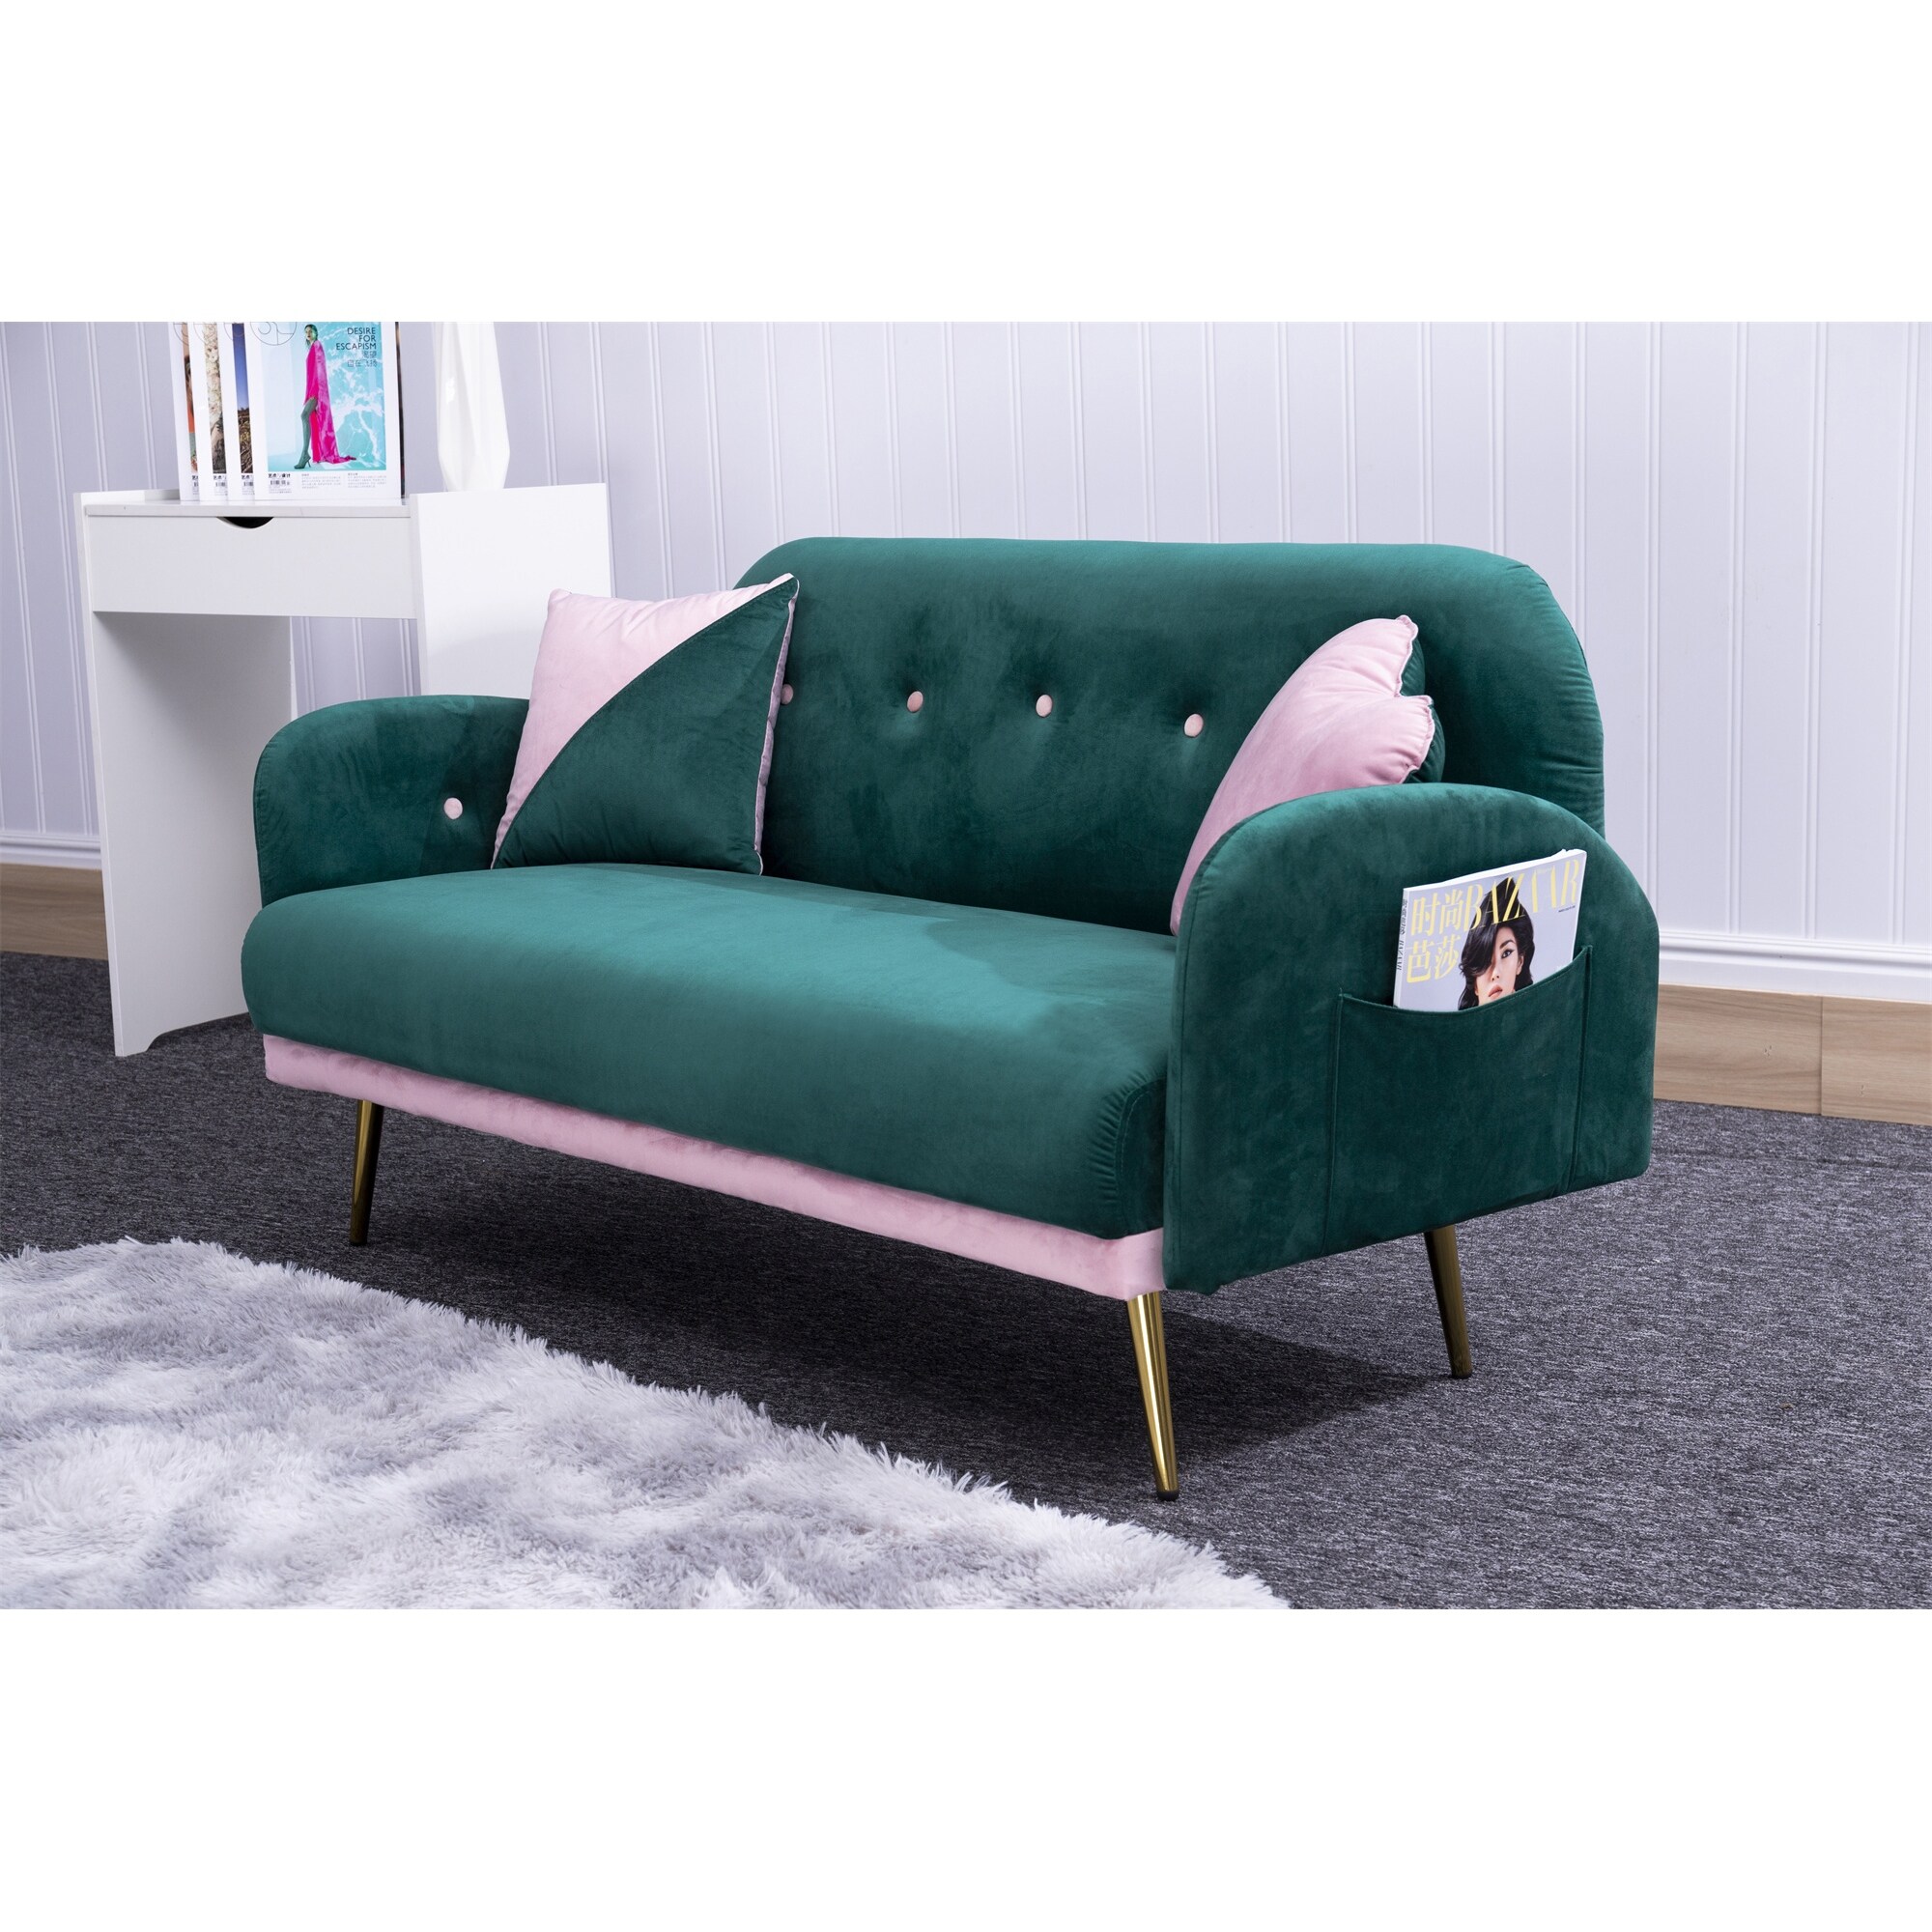 Velvet Sofa includes 2 Pillows for Small Spaces - Bed Bath & Beyond -  37251150